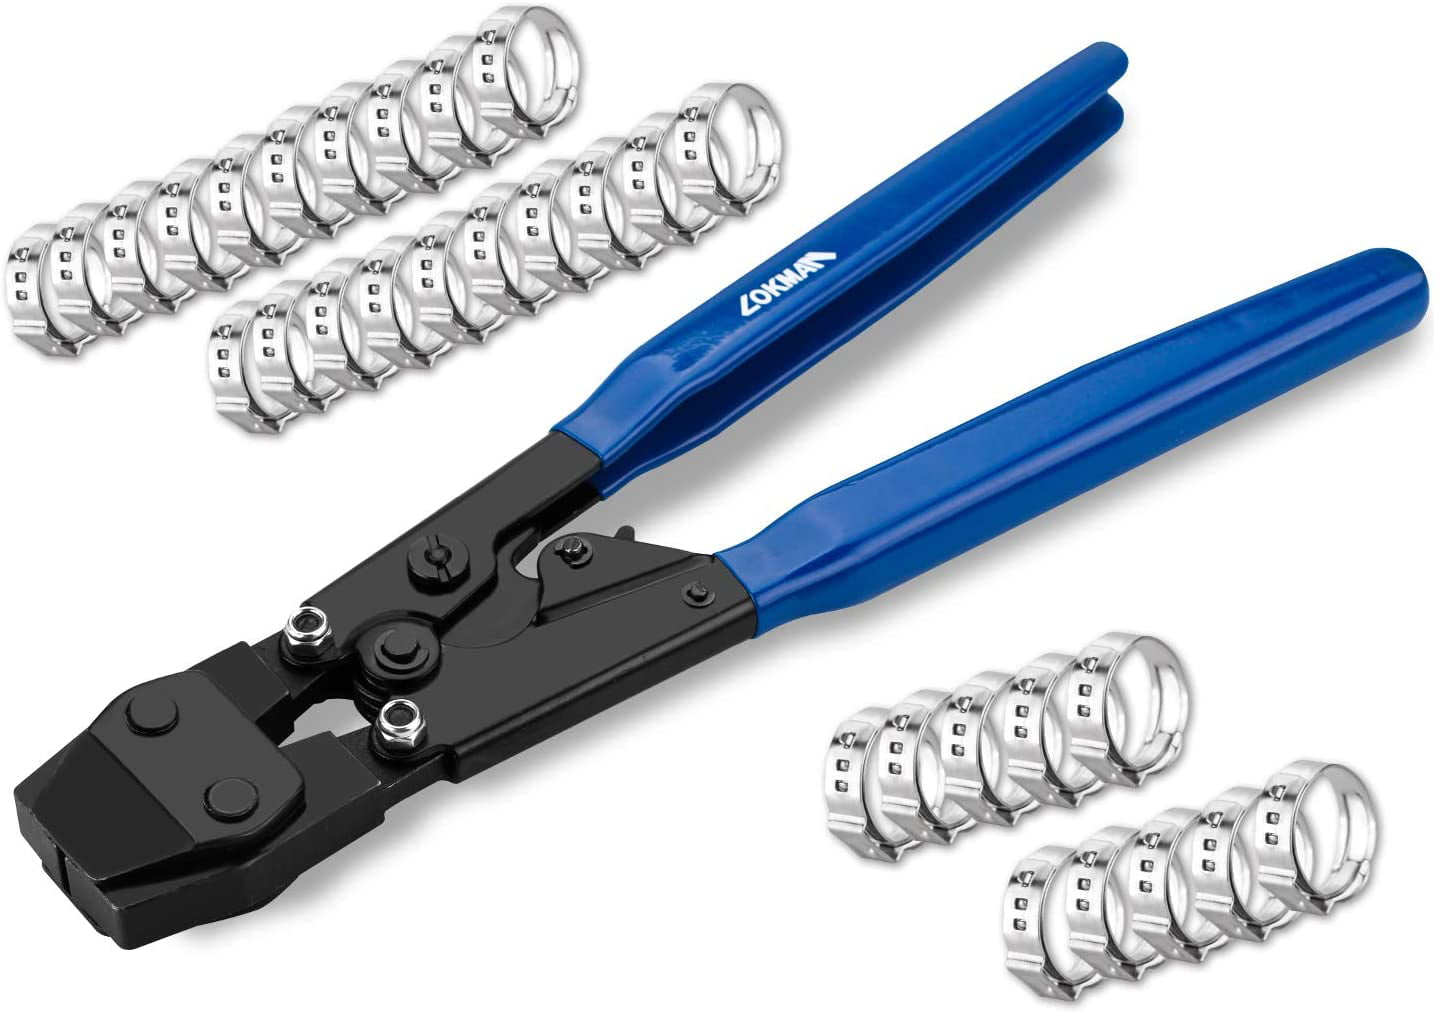 Details about   Tubing Plumbing Kit Cinch Crimping & Calibration Tool & Stainless Steel Clamps 